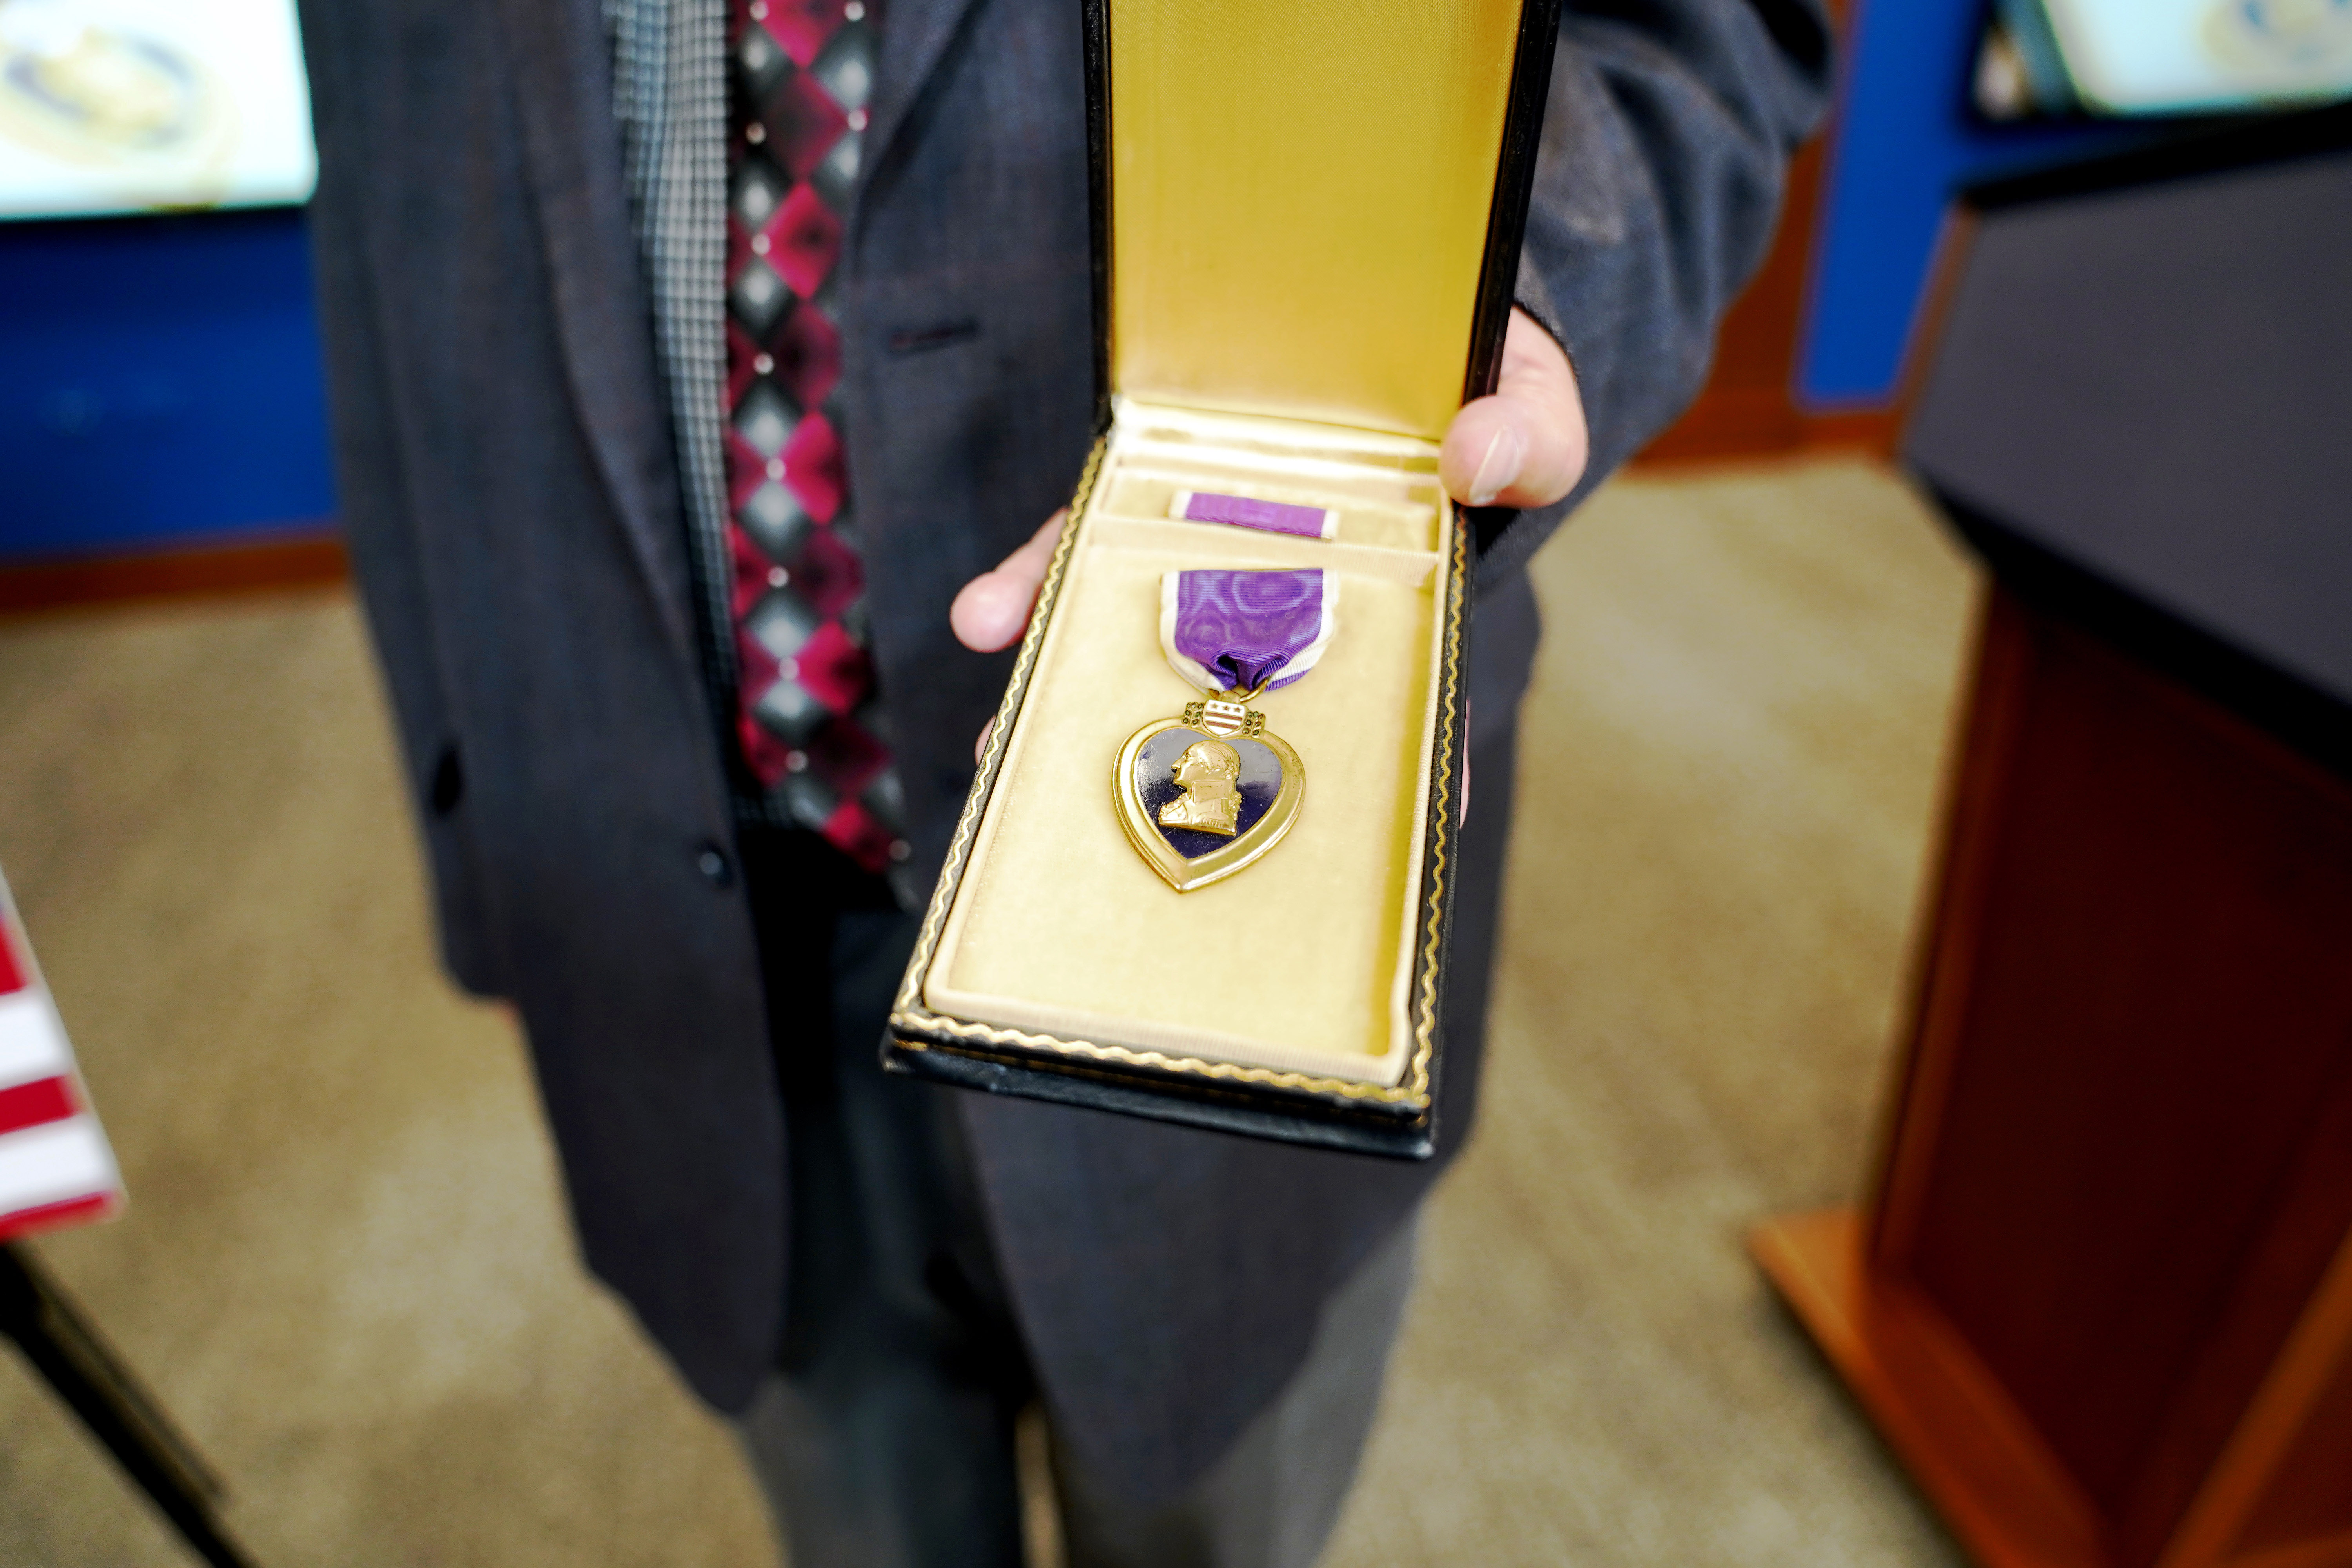 The Purple Heart awarded to Jerome Even after he was injured in the attack on Pearl Harbor, Dec. 7, 1941.